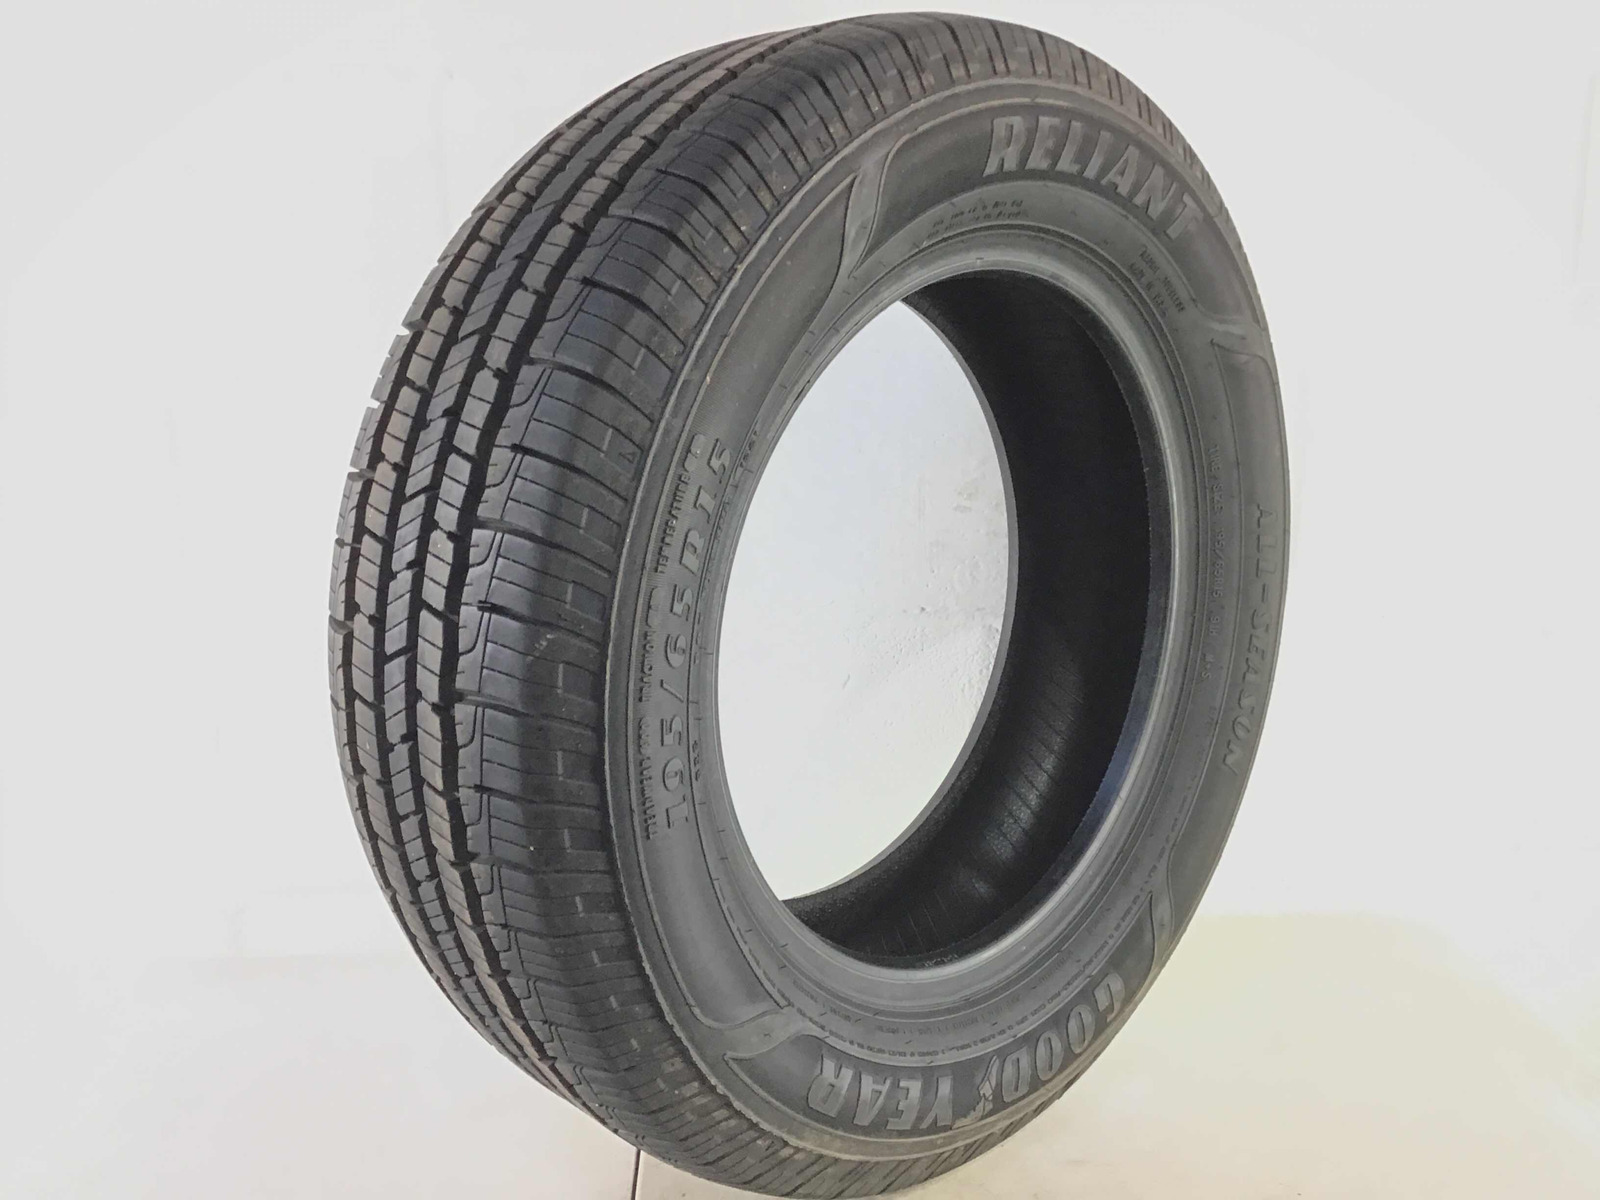 P195/65R15 Goodyear Reliant All-Season 91 H Used 9/32nds